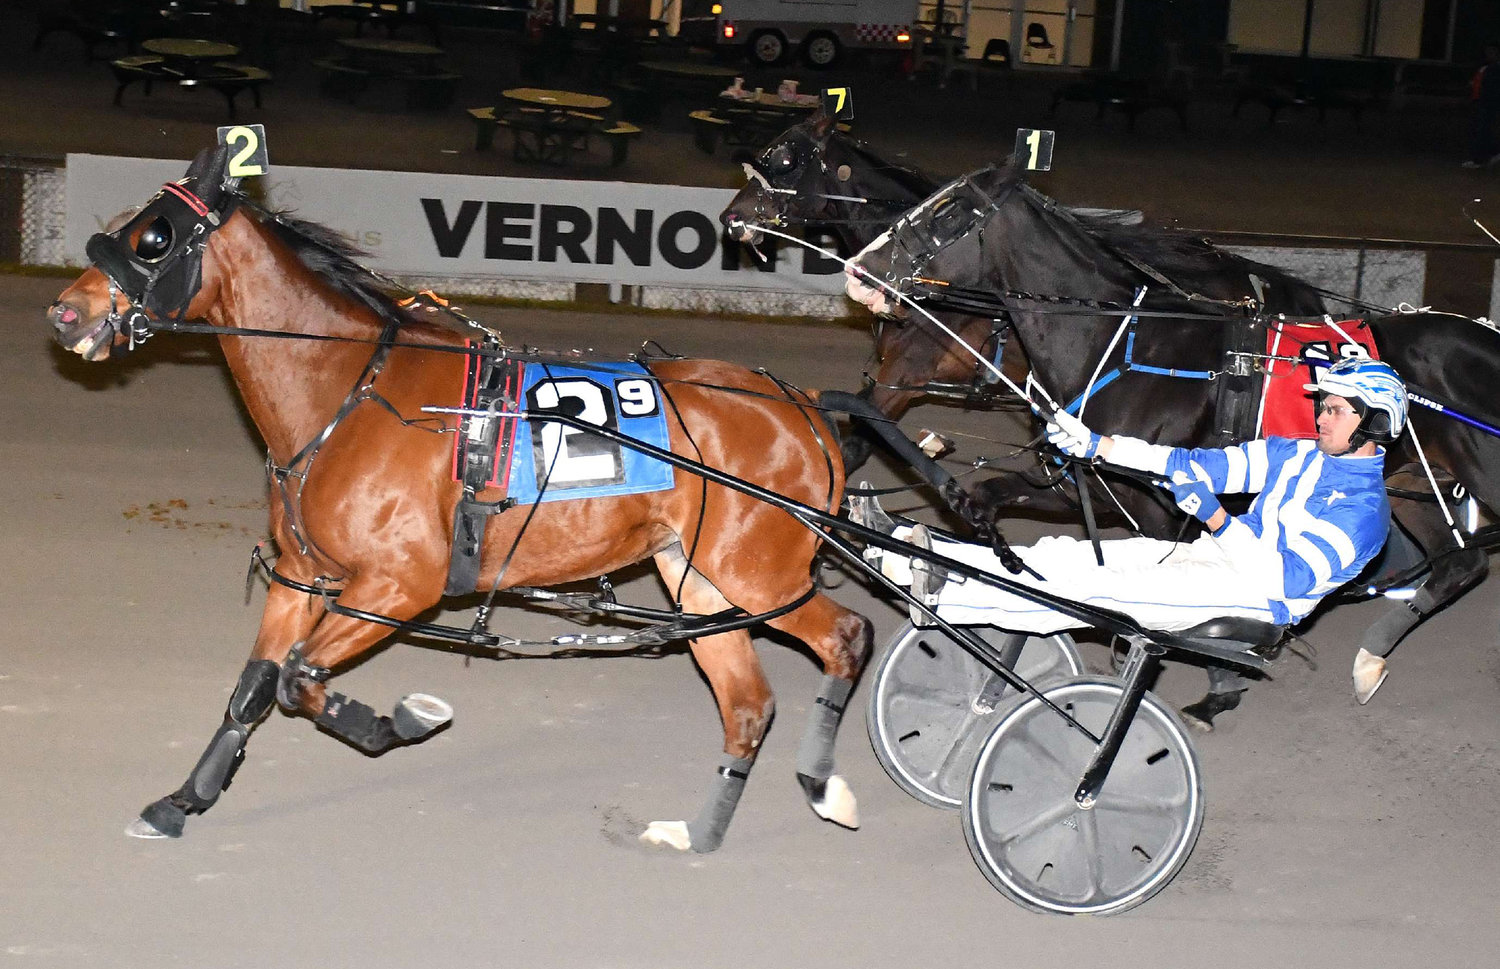 Rub Me and driver Steeven Genois made a late charge to get an upset victory in the $8,700 featured pace at Vernon Downs on Saturday. The 5-year-old gelding got a fifth season victory.